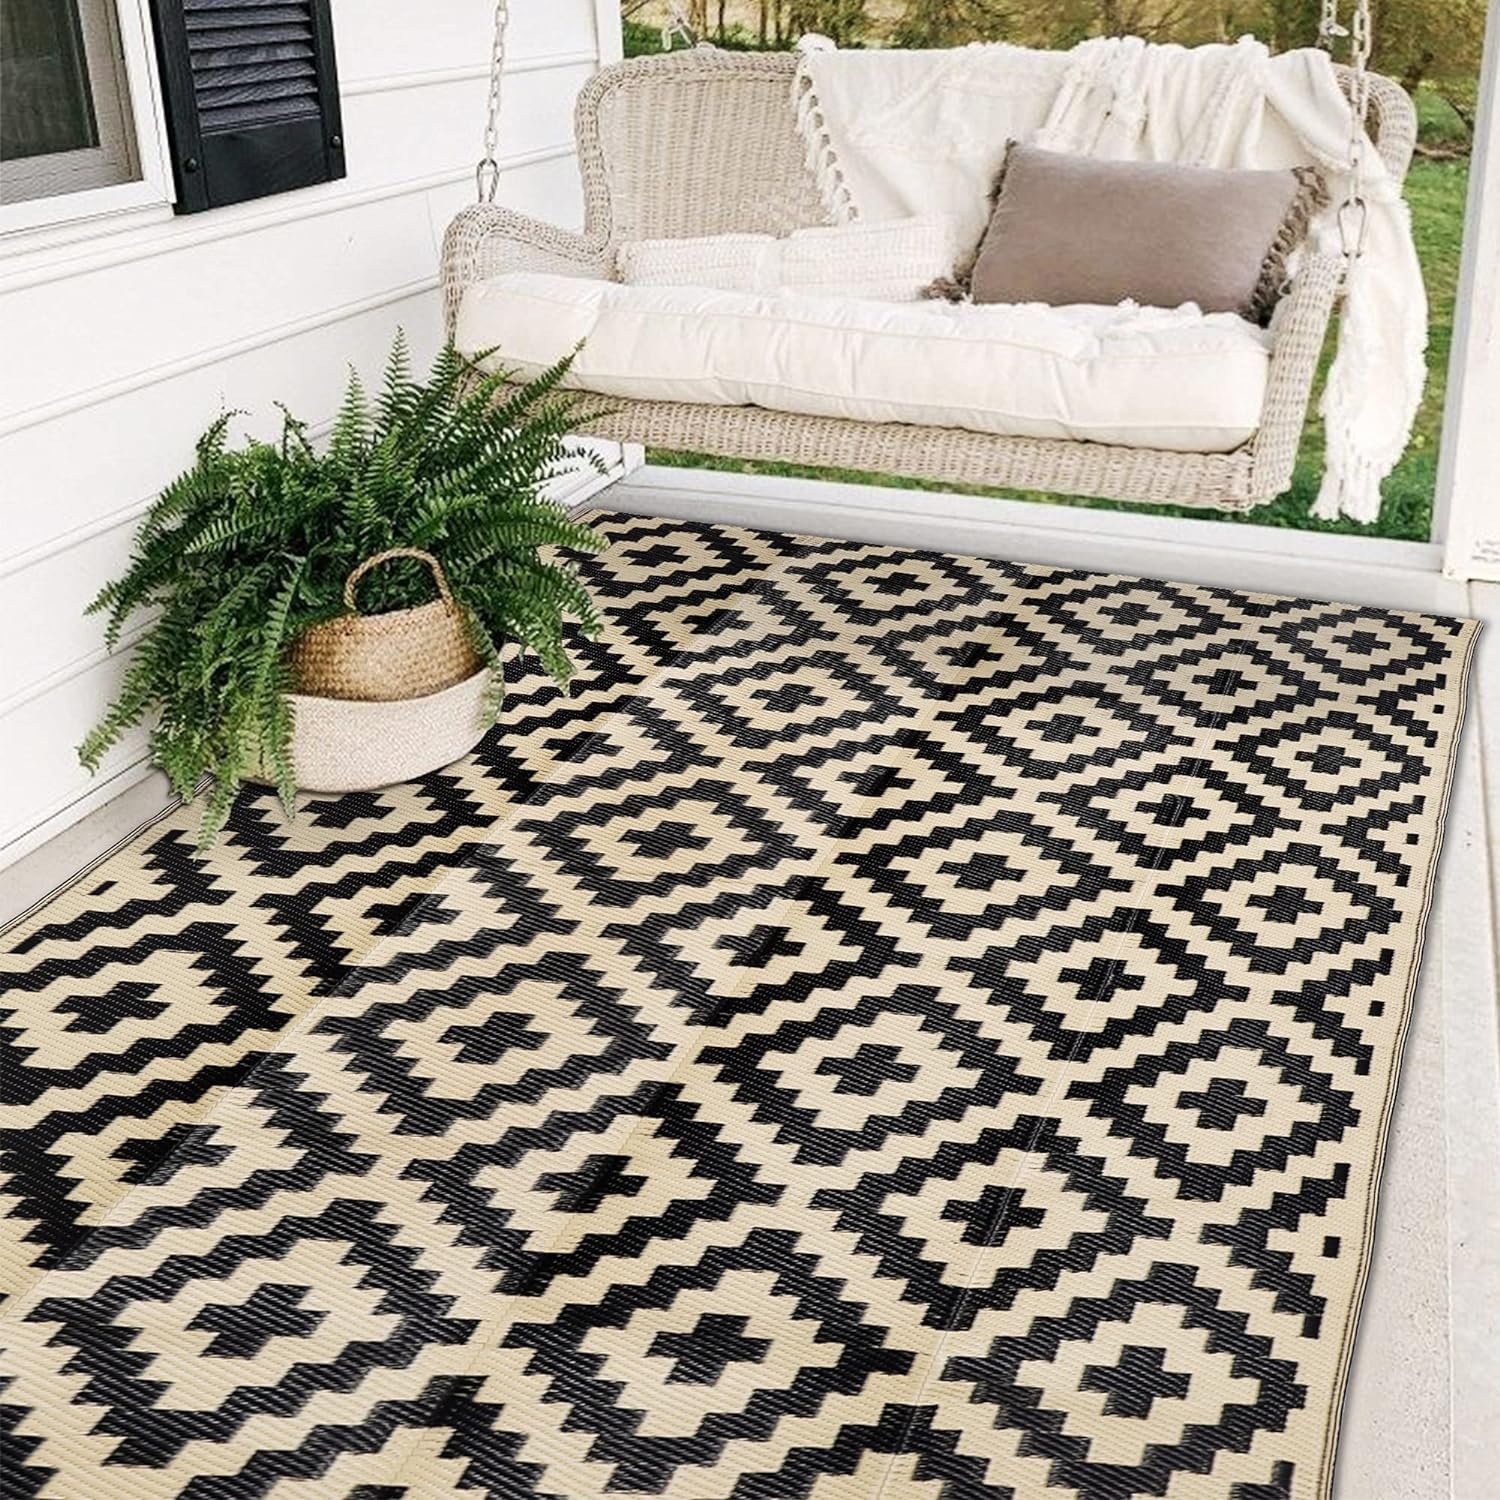 SAND MINE Reversible Mats, Plastic Straw Rug, Modern Area Rug, Large Floor Mat and Rug for Outdoors, RV, Patio, Backyard, Deck, Picnic, Beach, Trailer, Camping, Black  Beige, 5 x 8